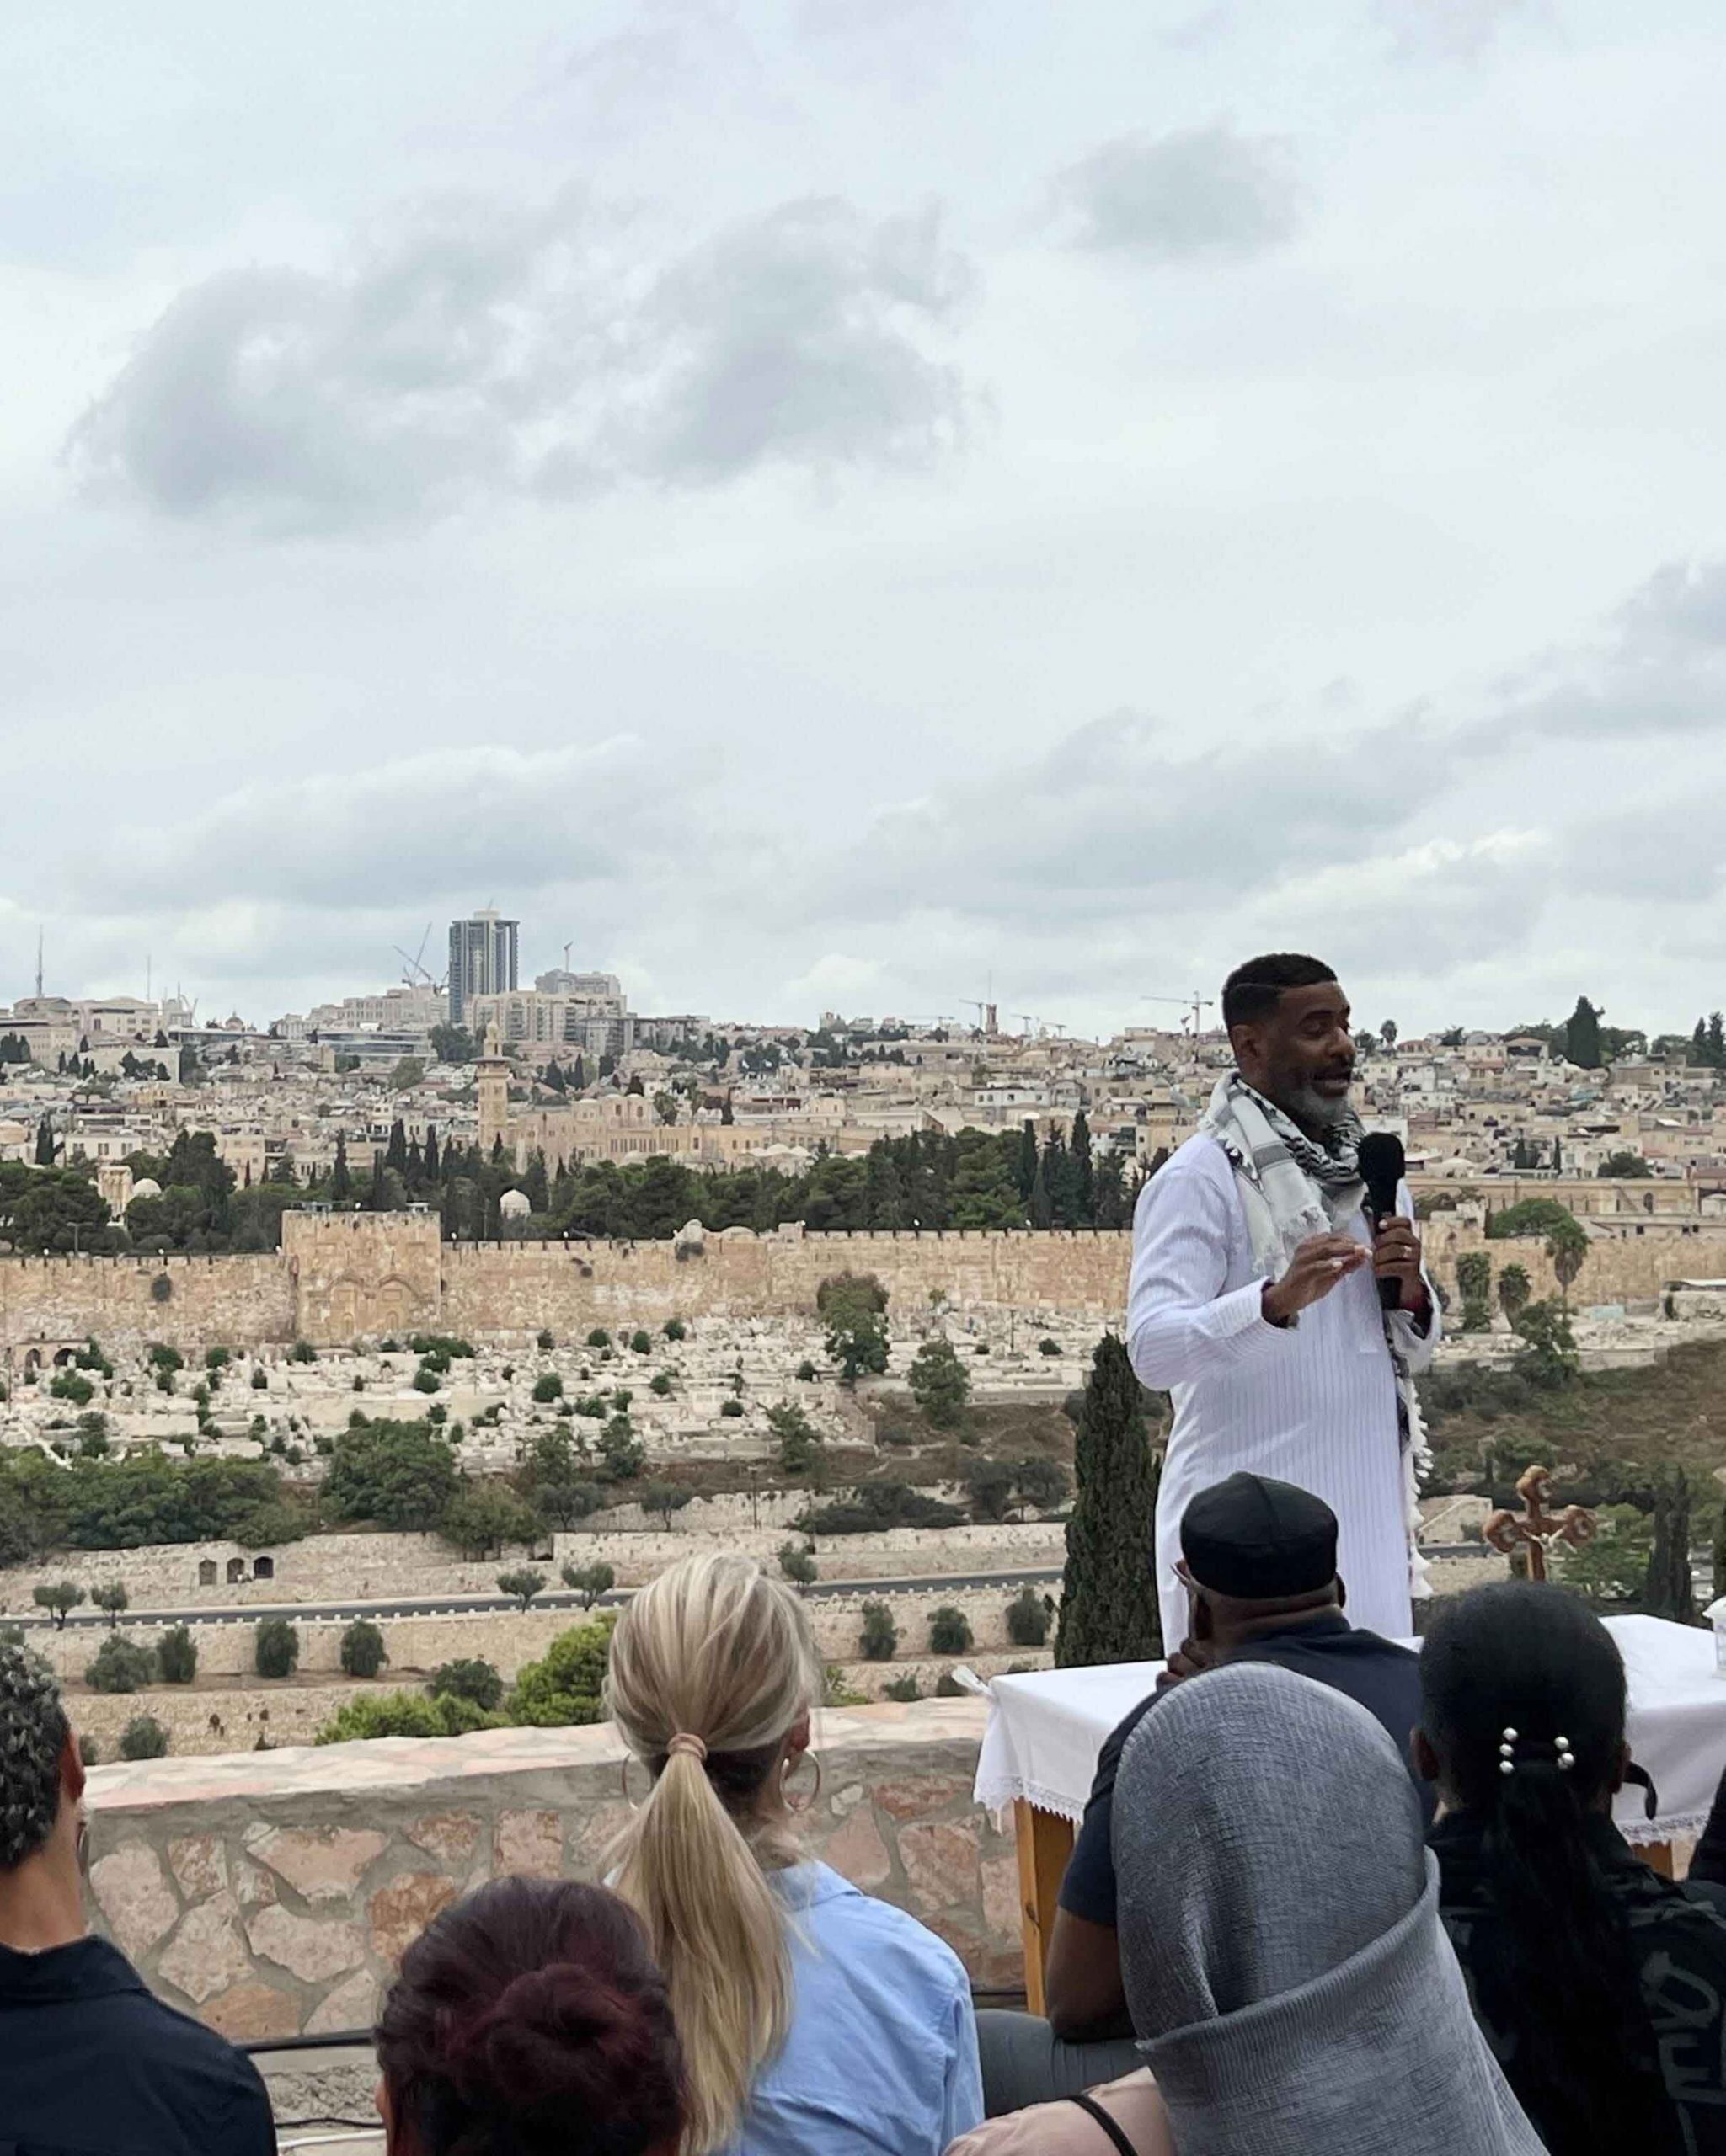 A photo of a man speaking into a microphone addresses an attentive group of people, with a view of Jerusalem in the background